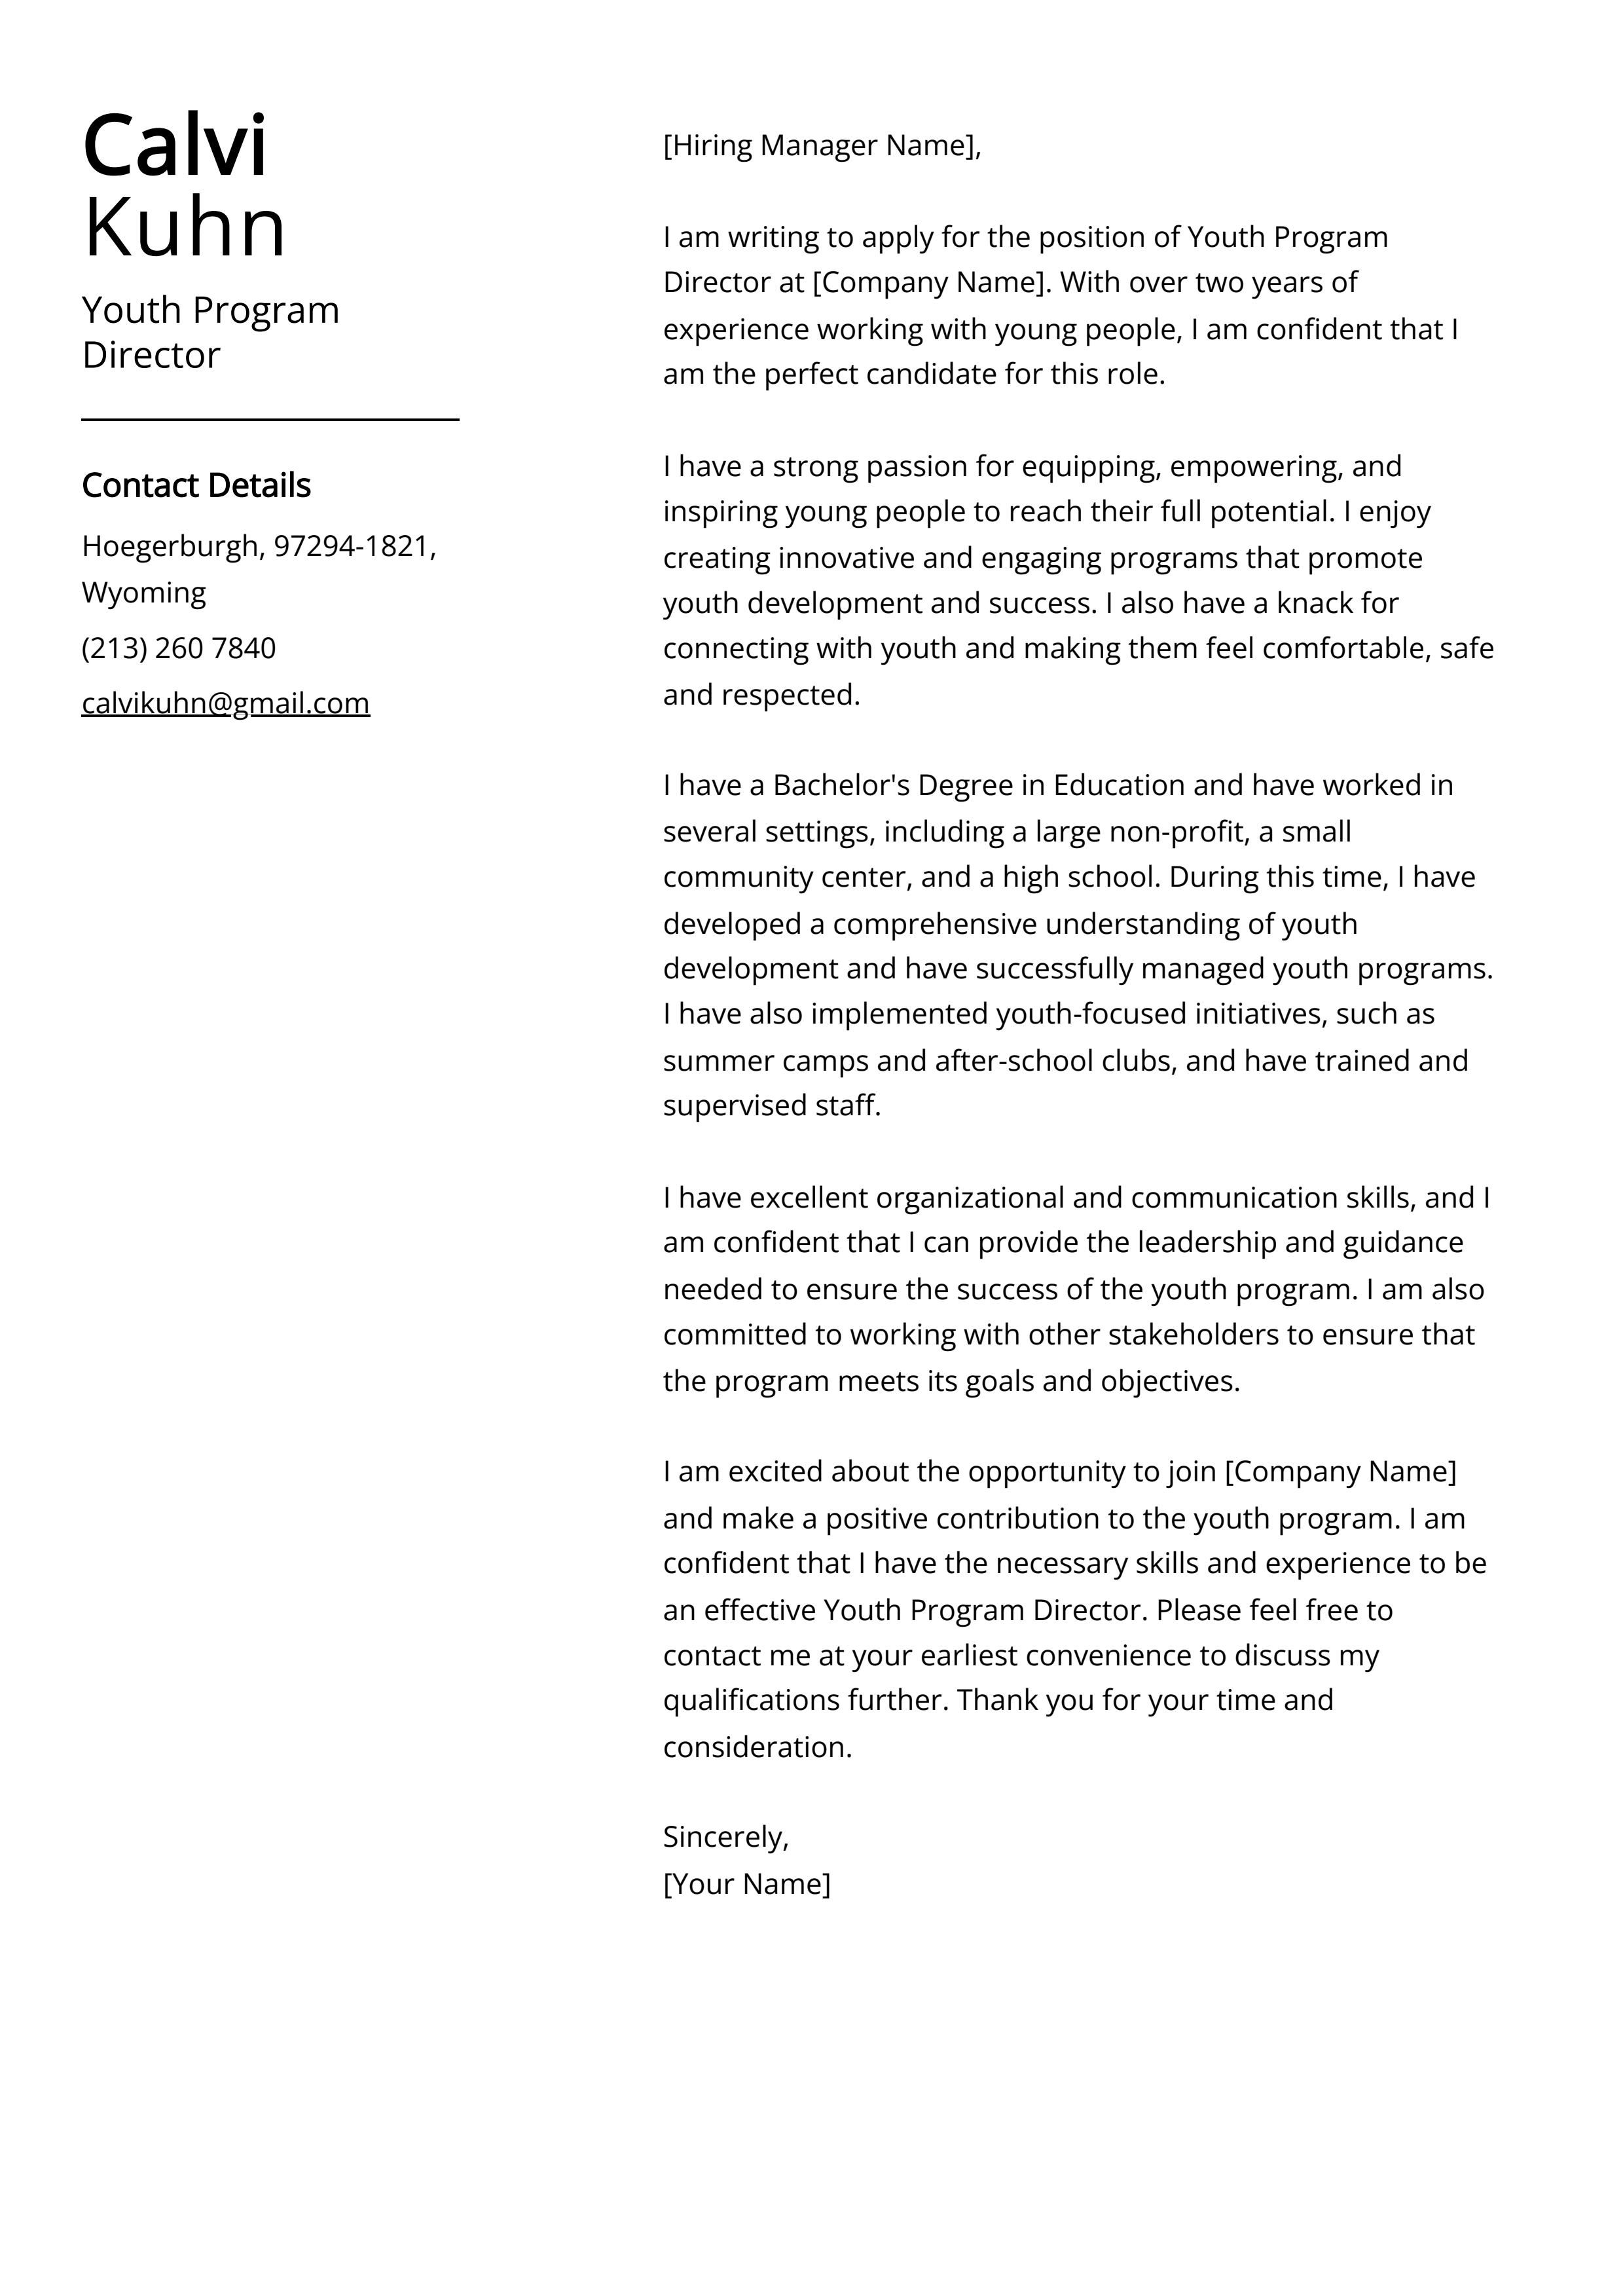 Youth Program Director Cover Letter Example